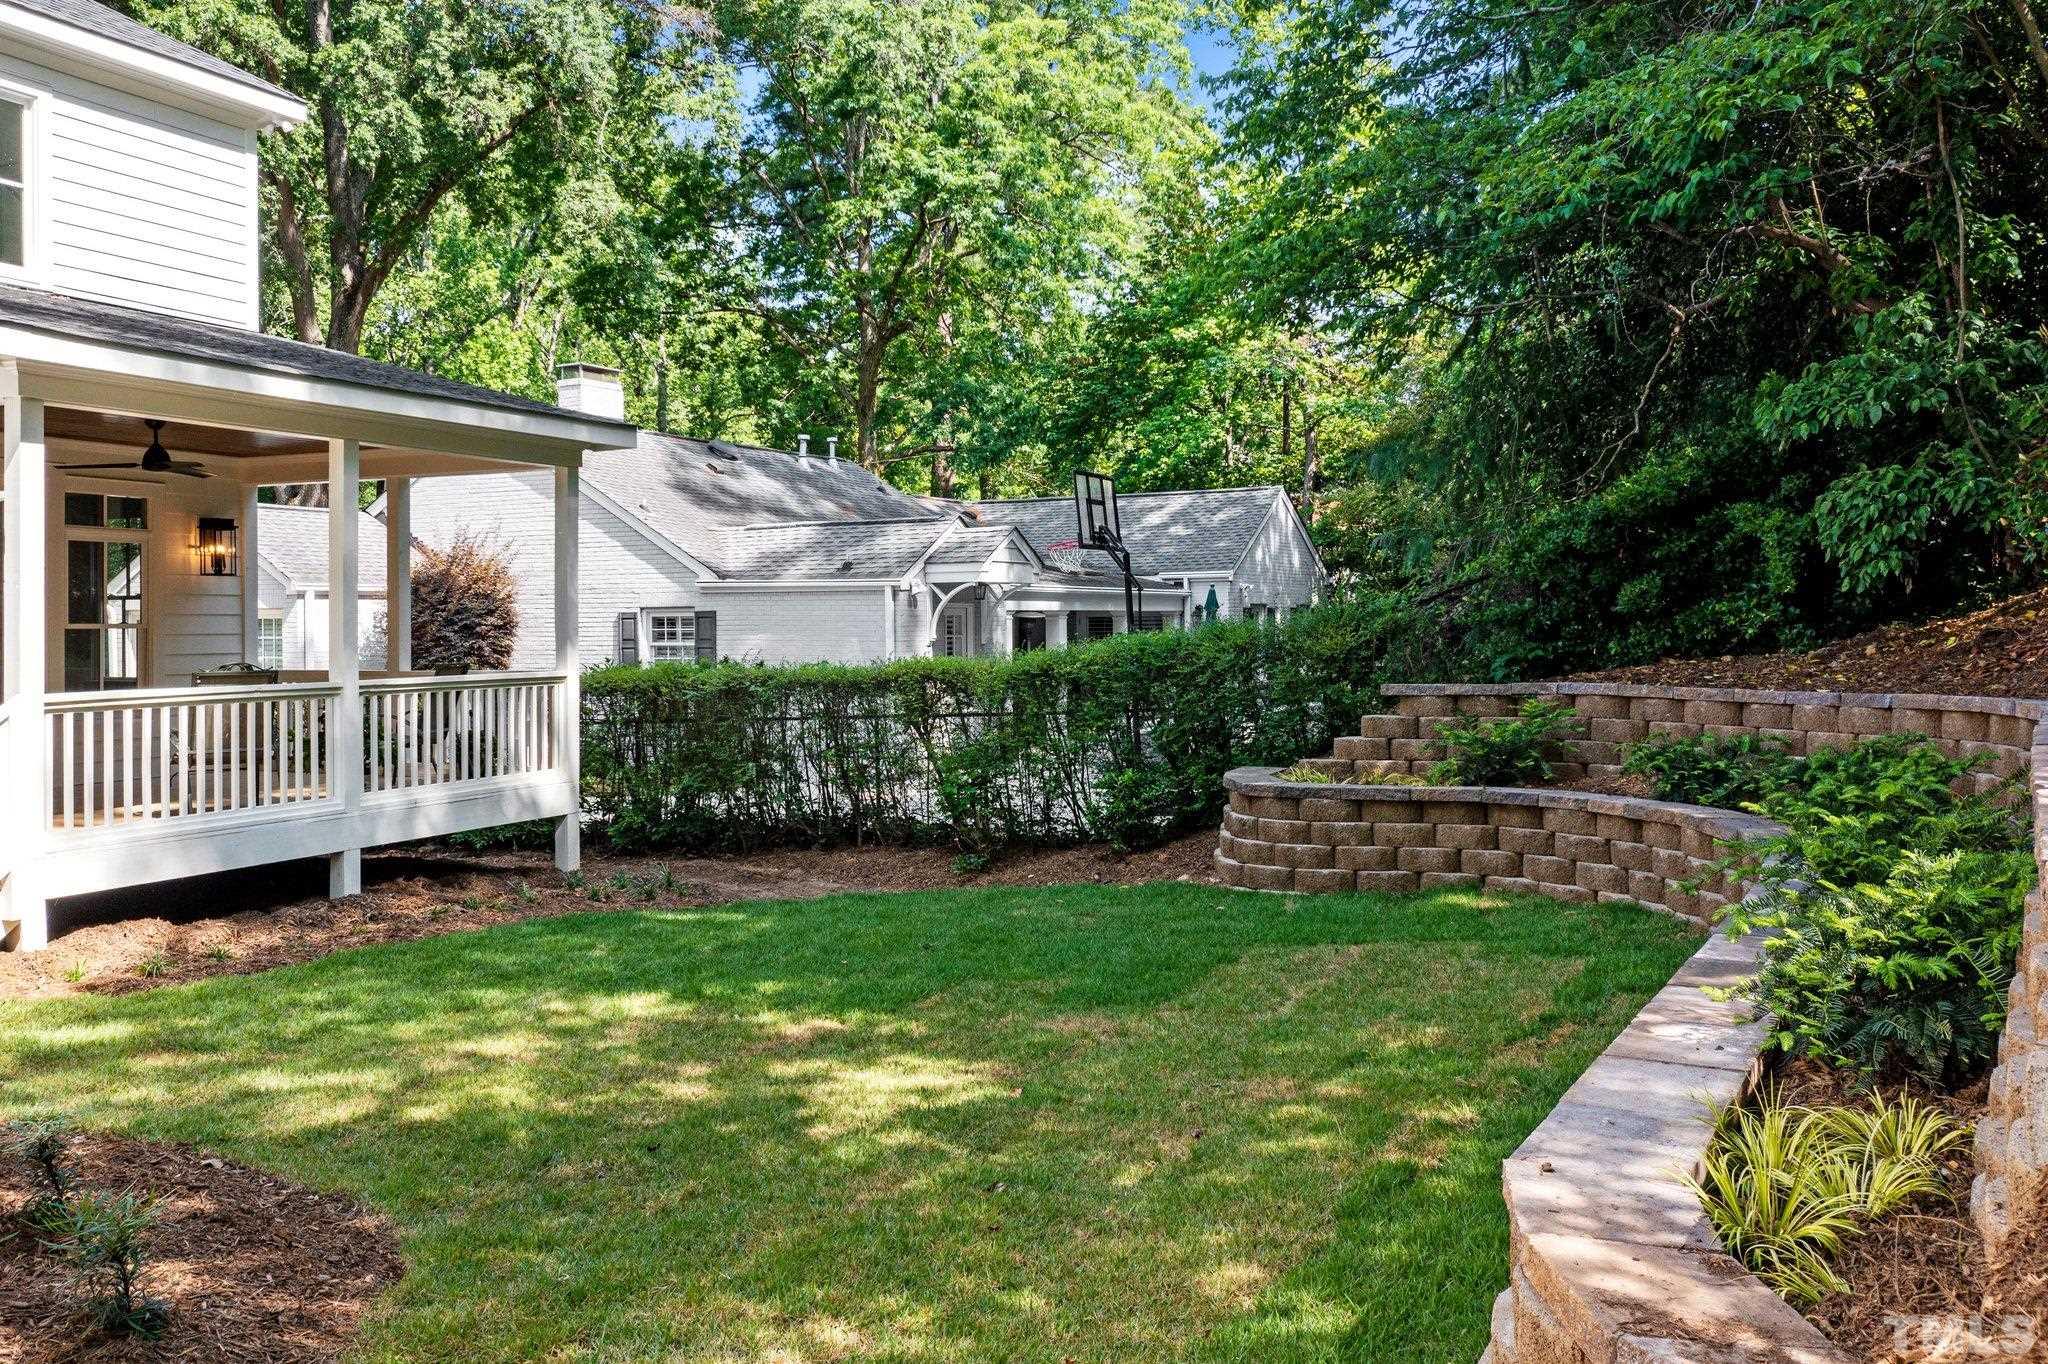 Newly constructed retaining walls create a cozy, semi-private backyard space.